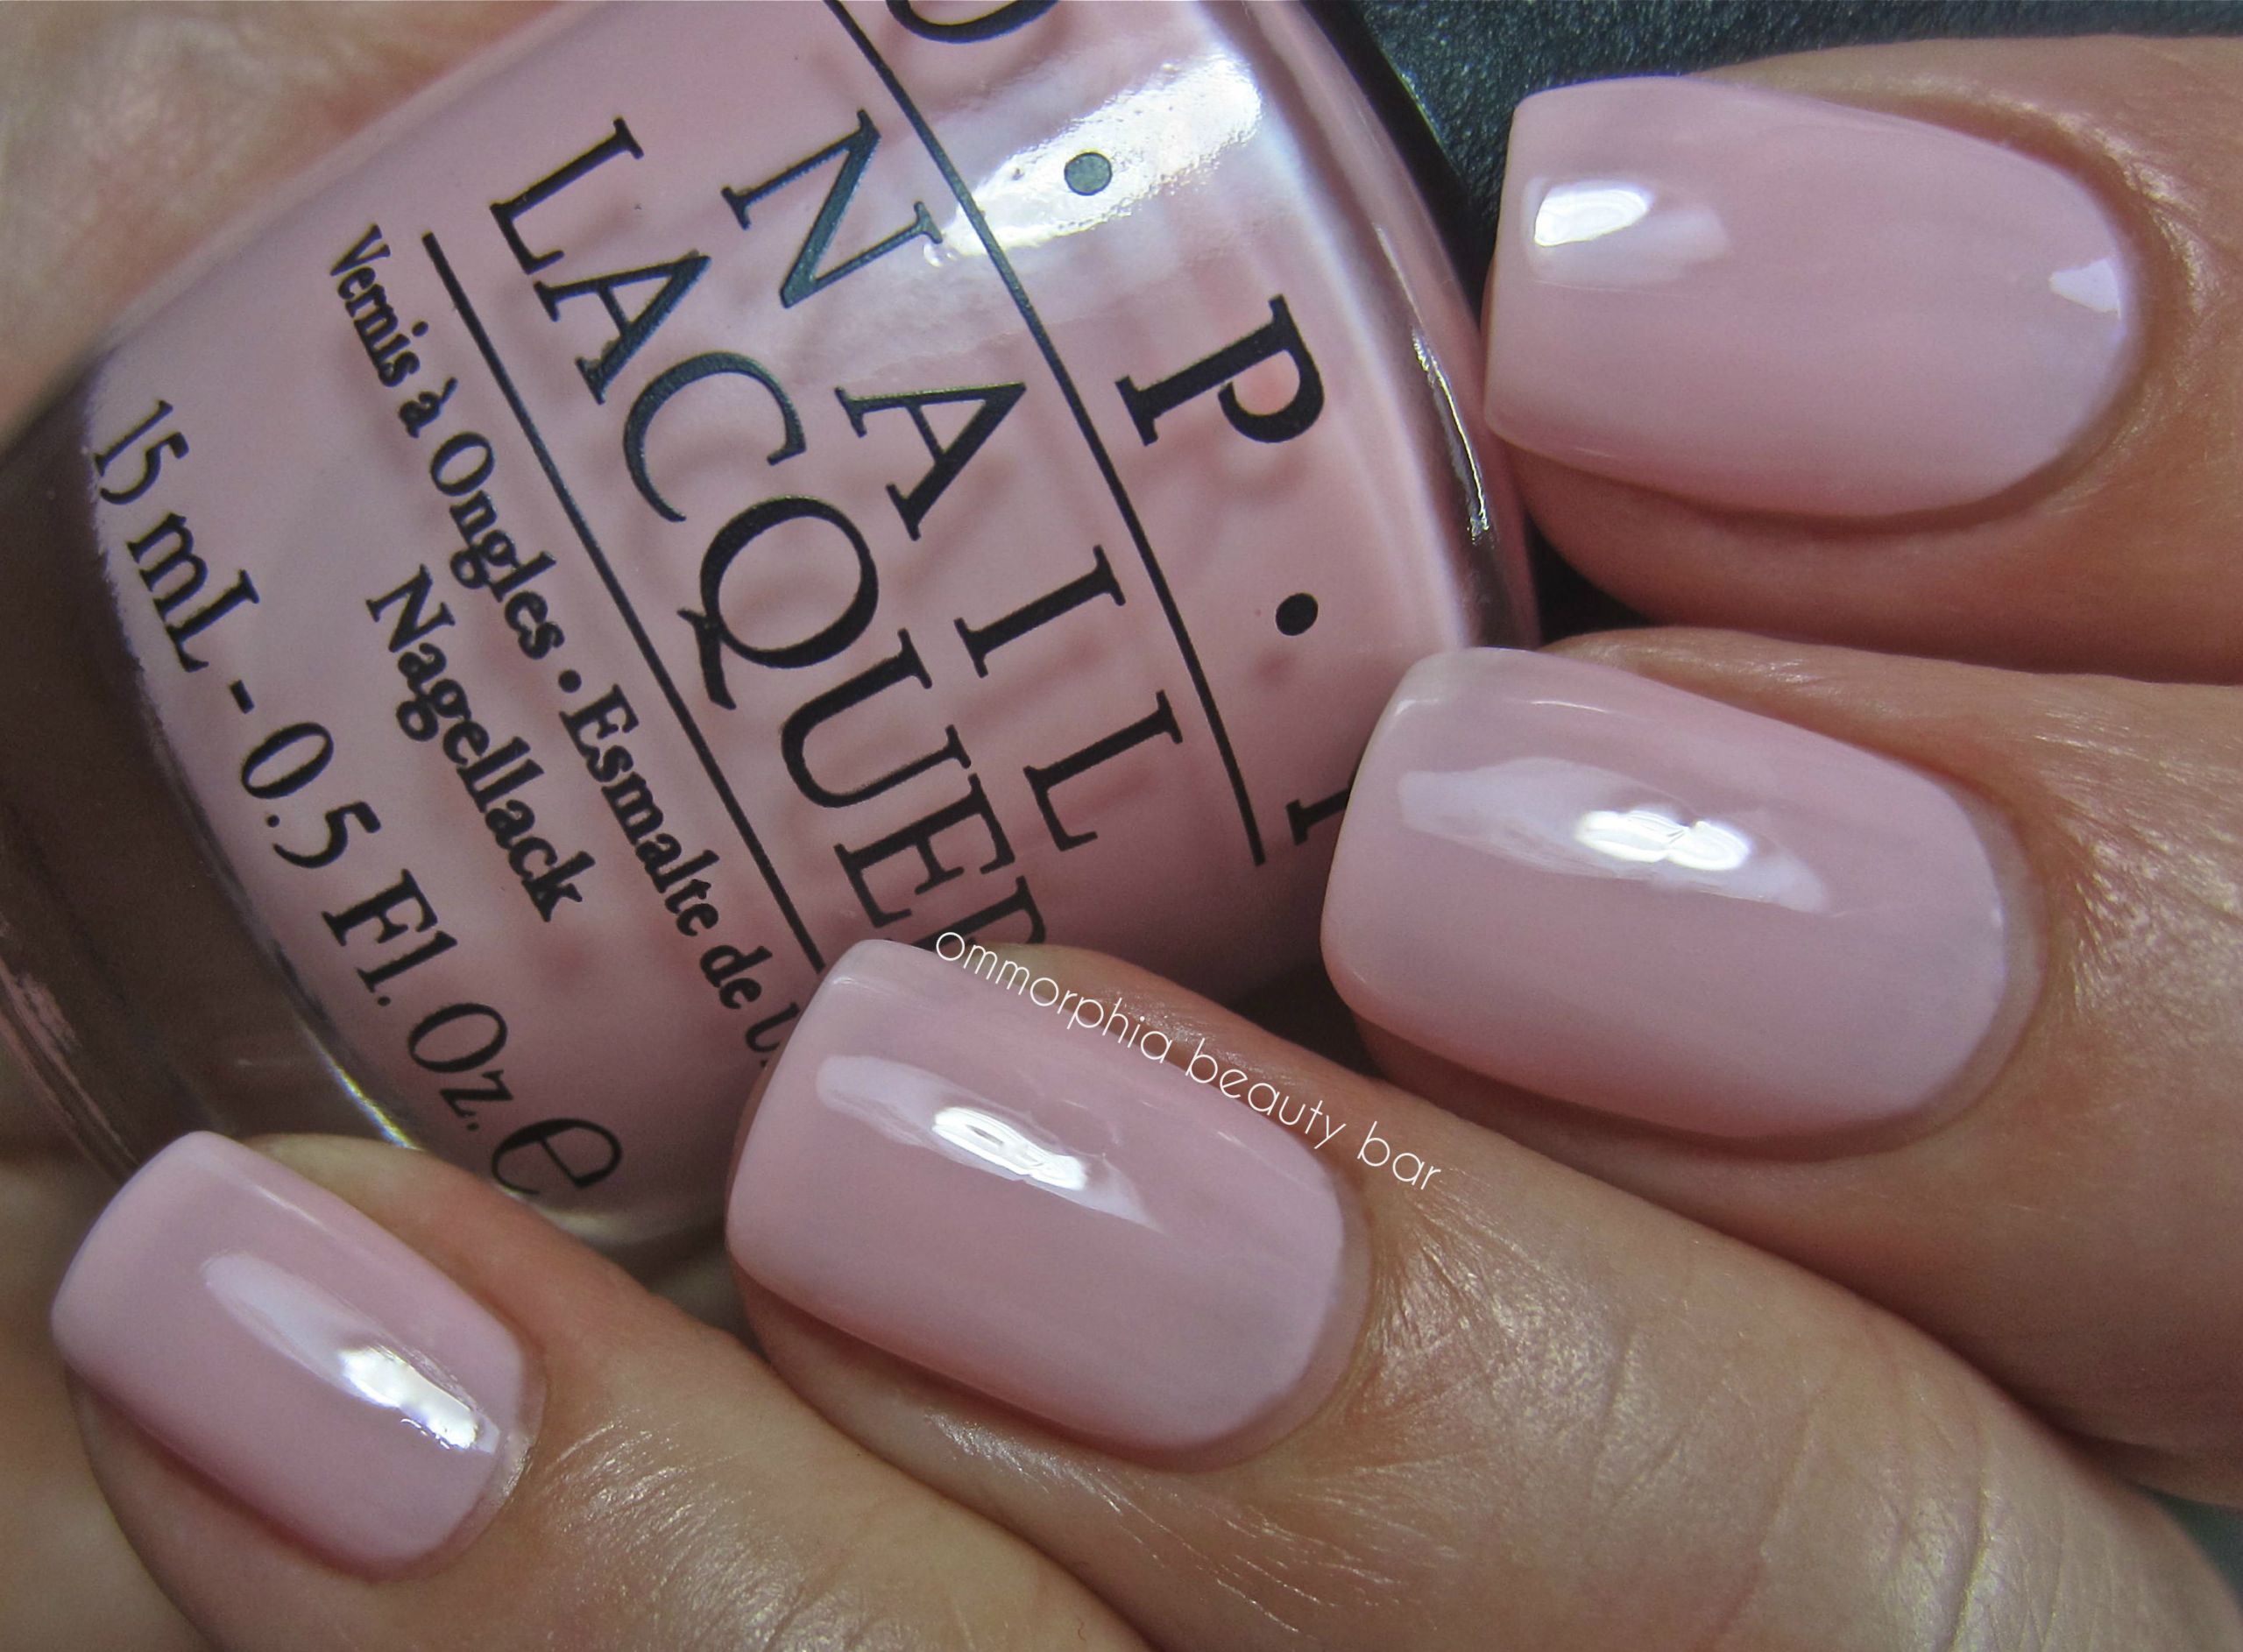 Opi Wedding Nail Polish
 Styles & Ideas Chic Opi Wedding Colors To plete Your